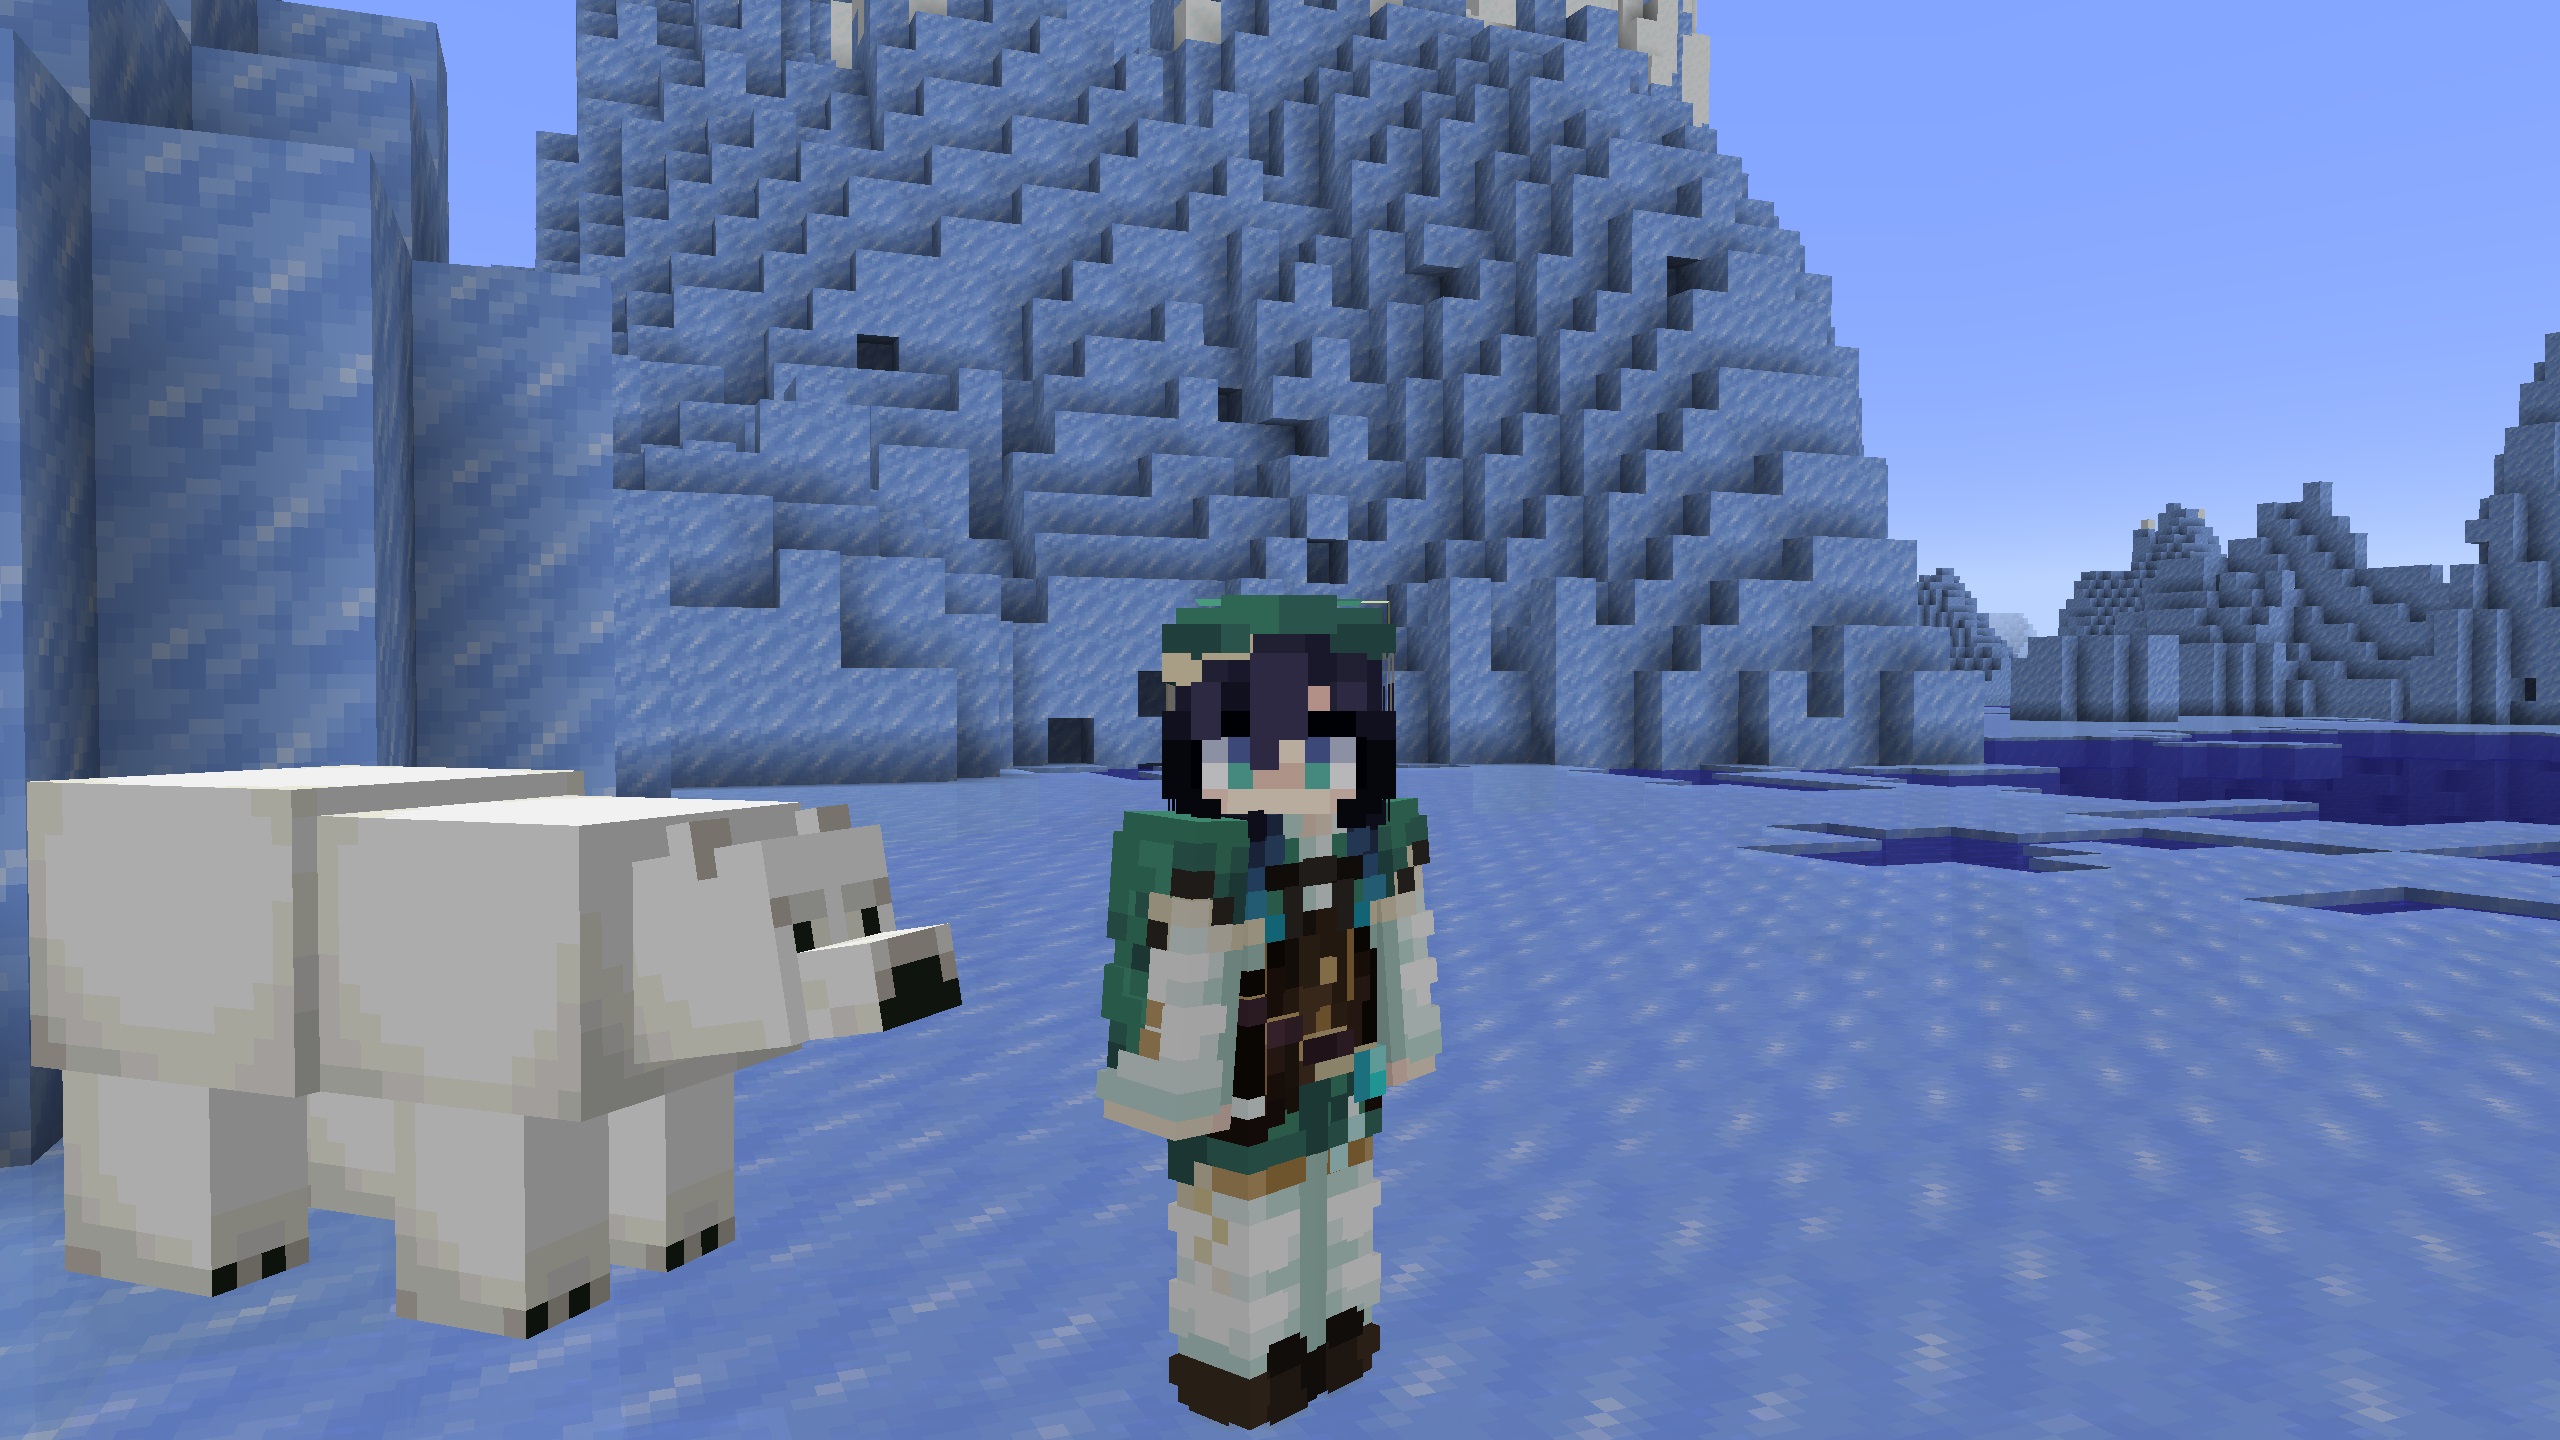 Minecraft skin - Venti from Genshin Impact wearing his green hat, cape, and tunic